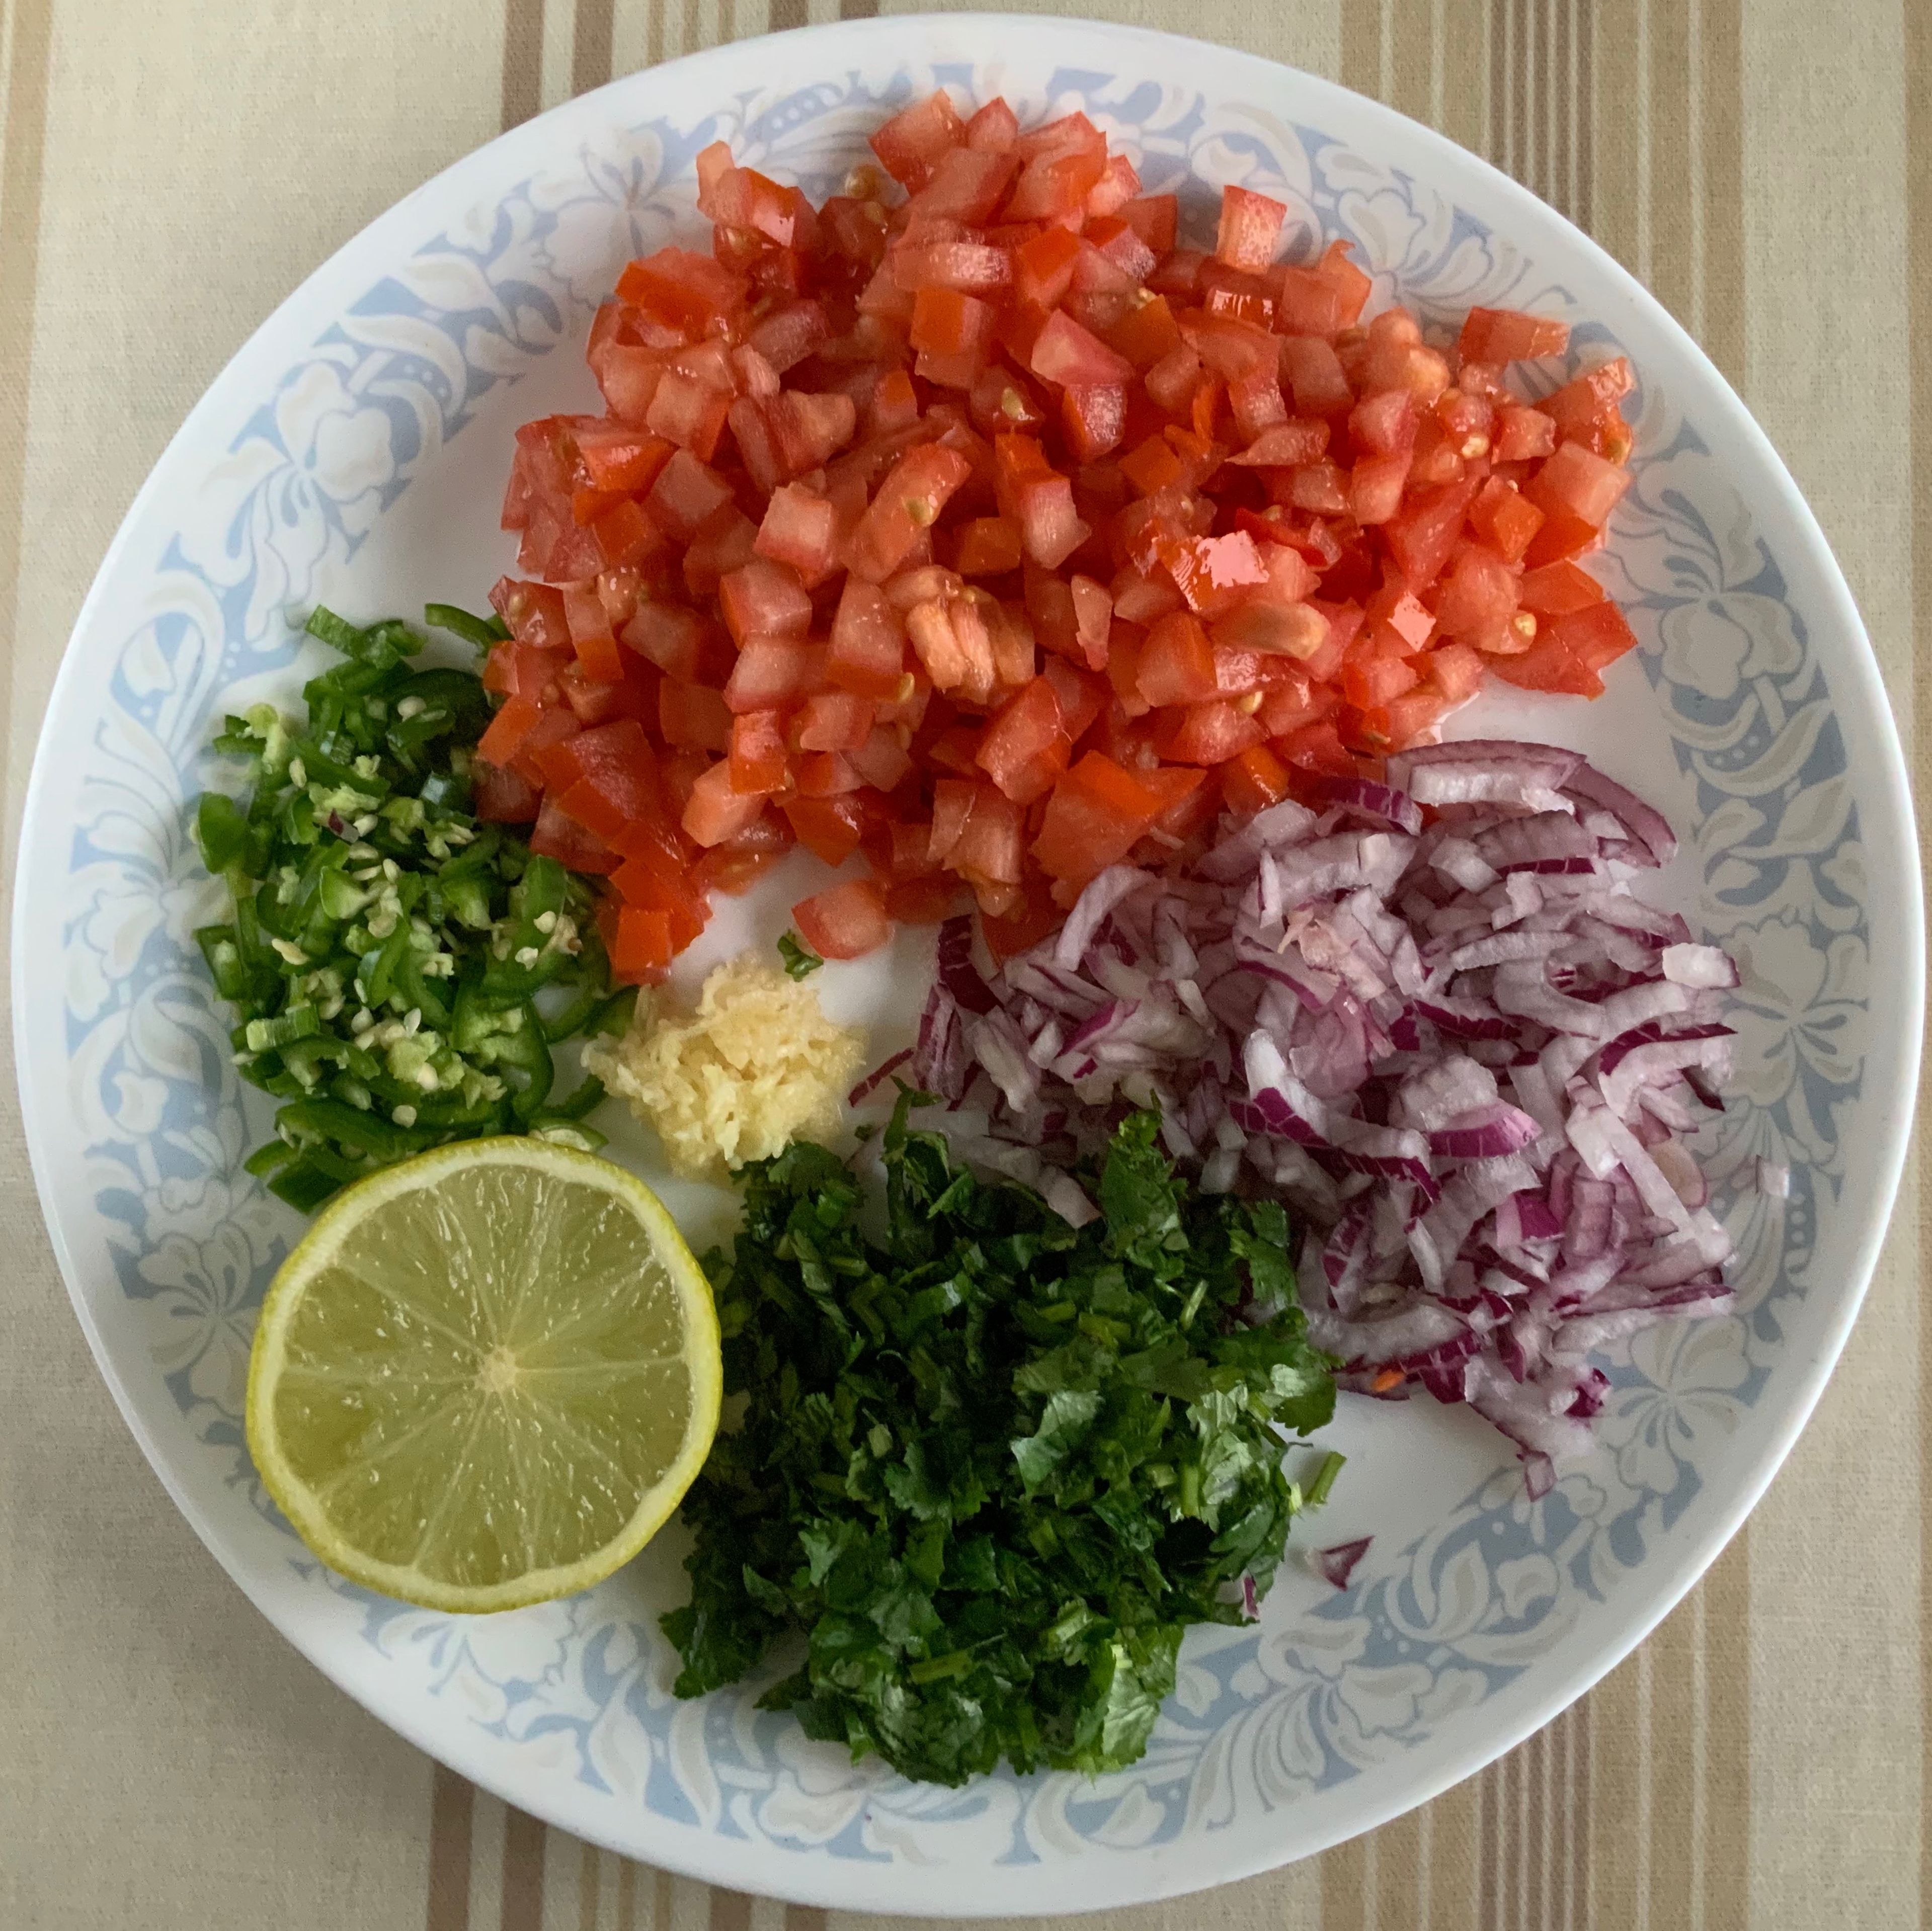 Finely chop the onion, green pepper, tomatoes, cilantro and chili pepper.